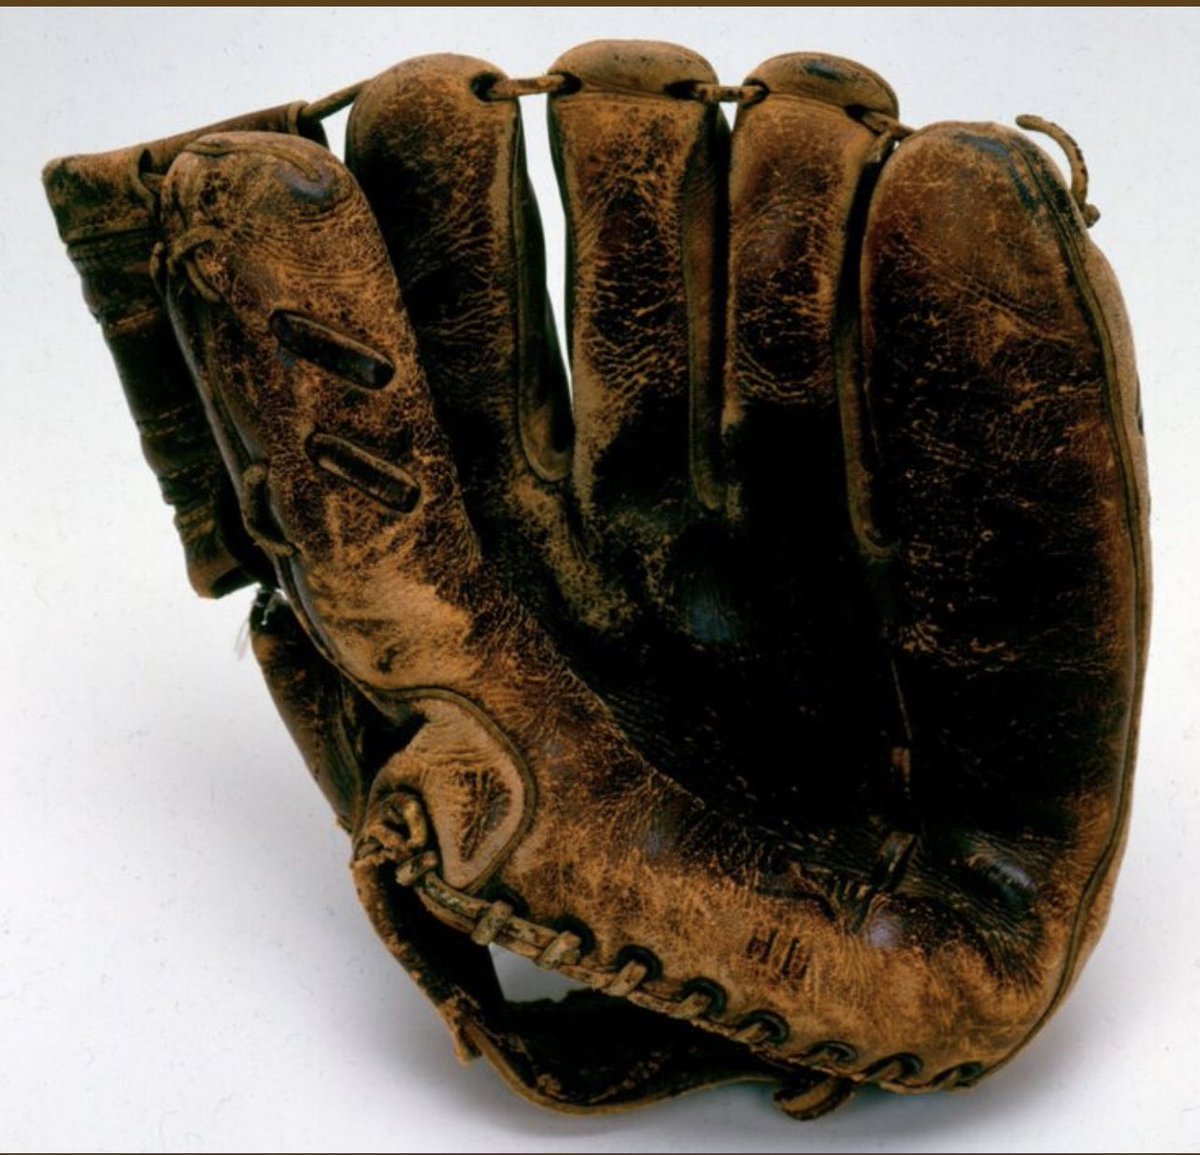 This is the Glove Willie Mays used to make the “catch” in the World Series.